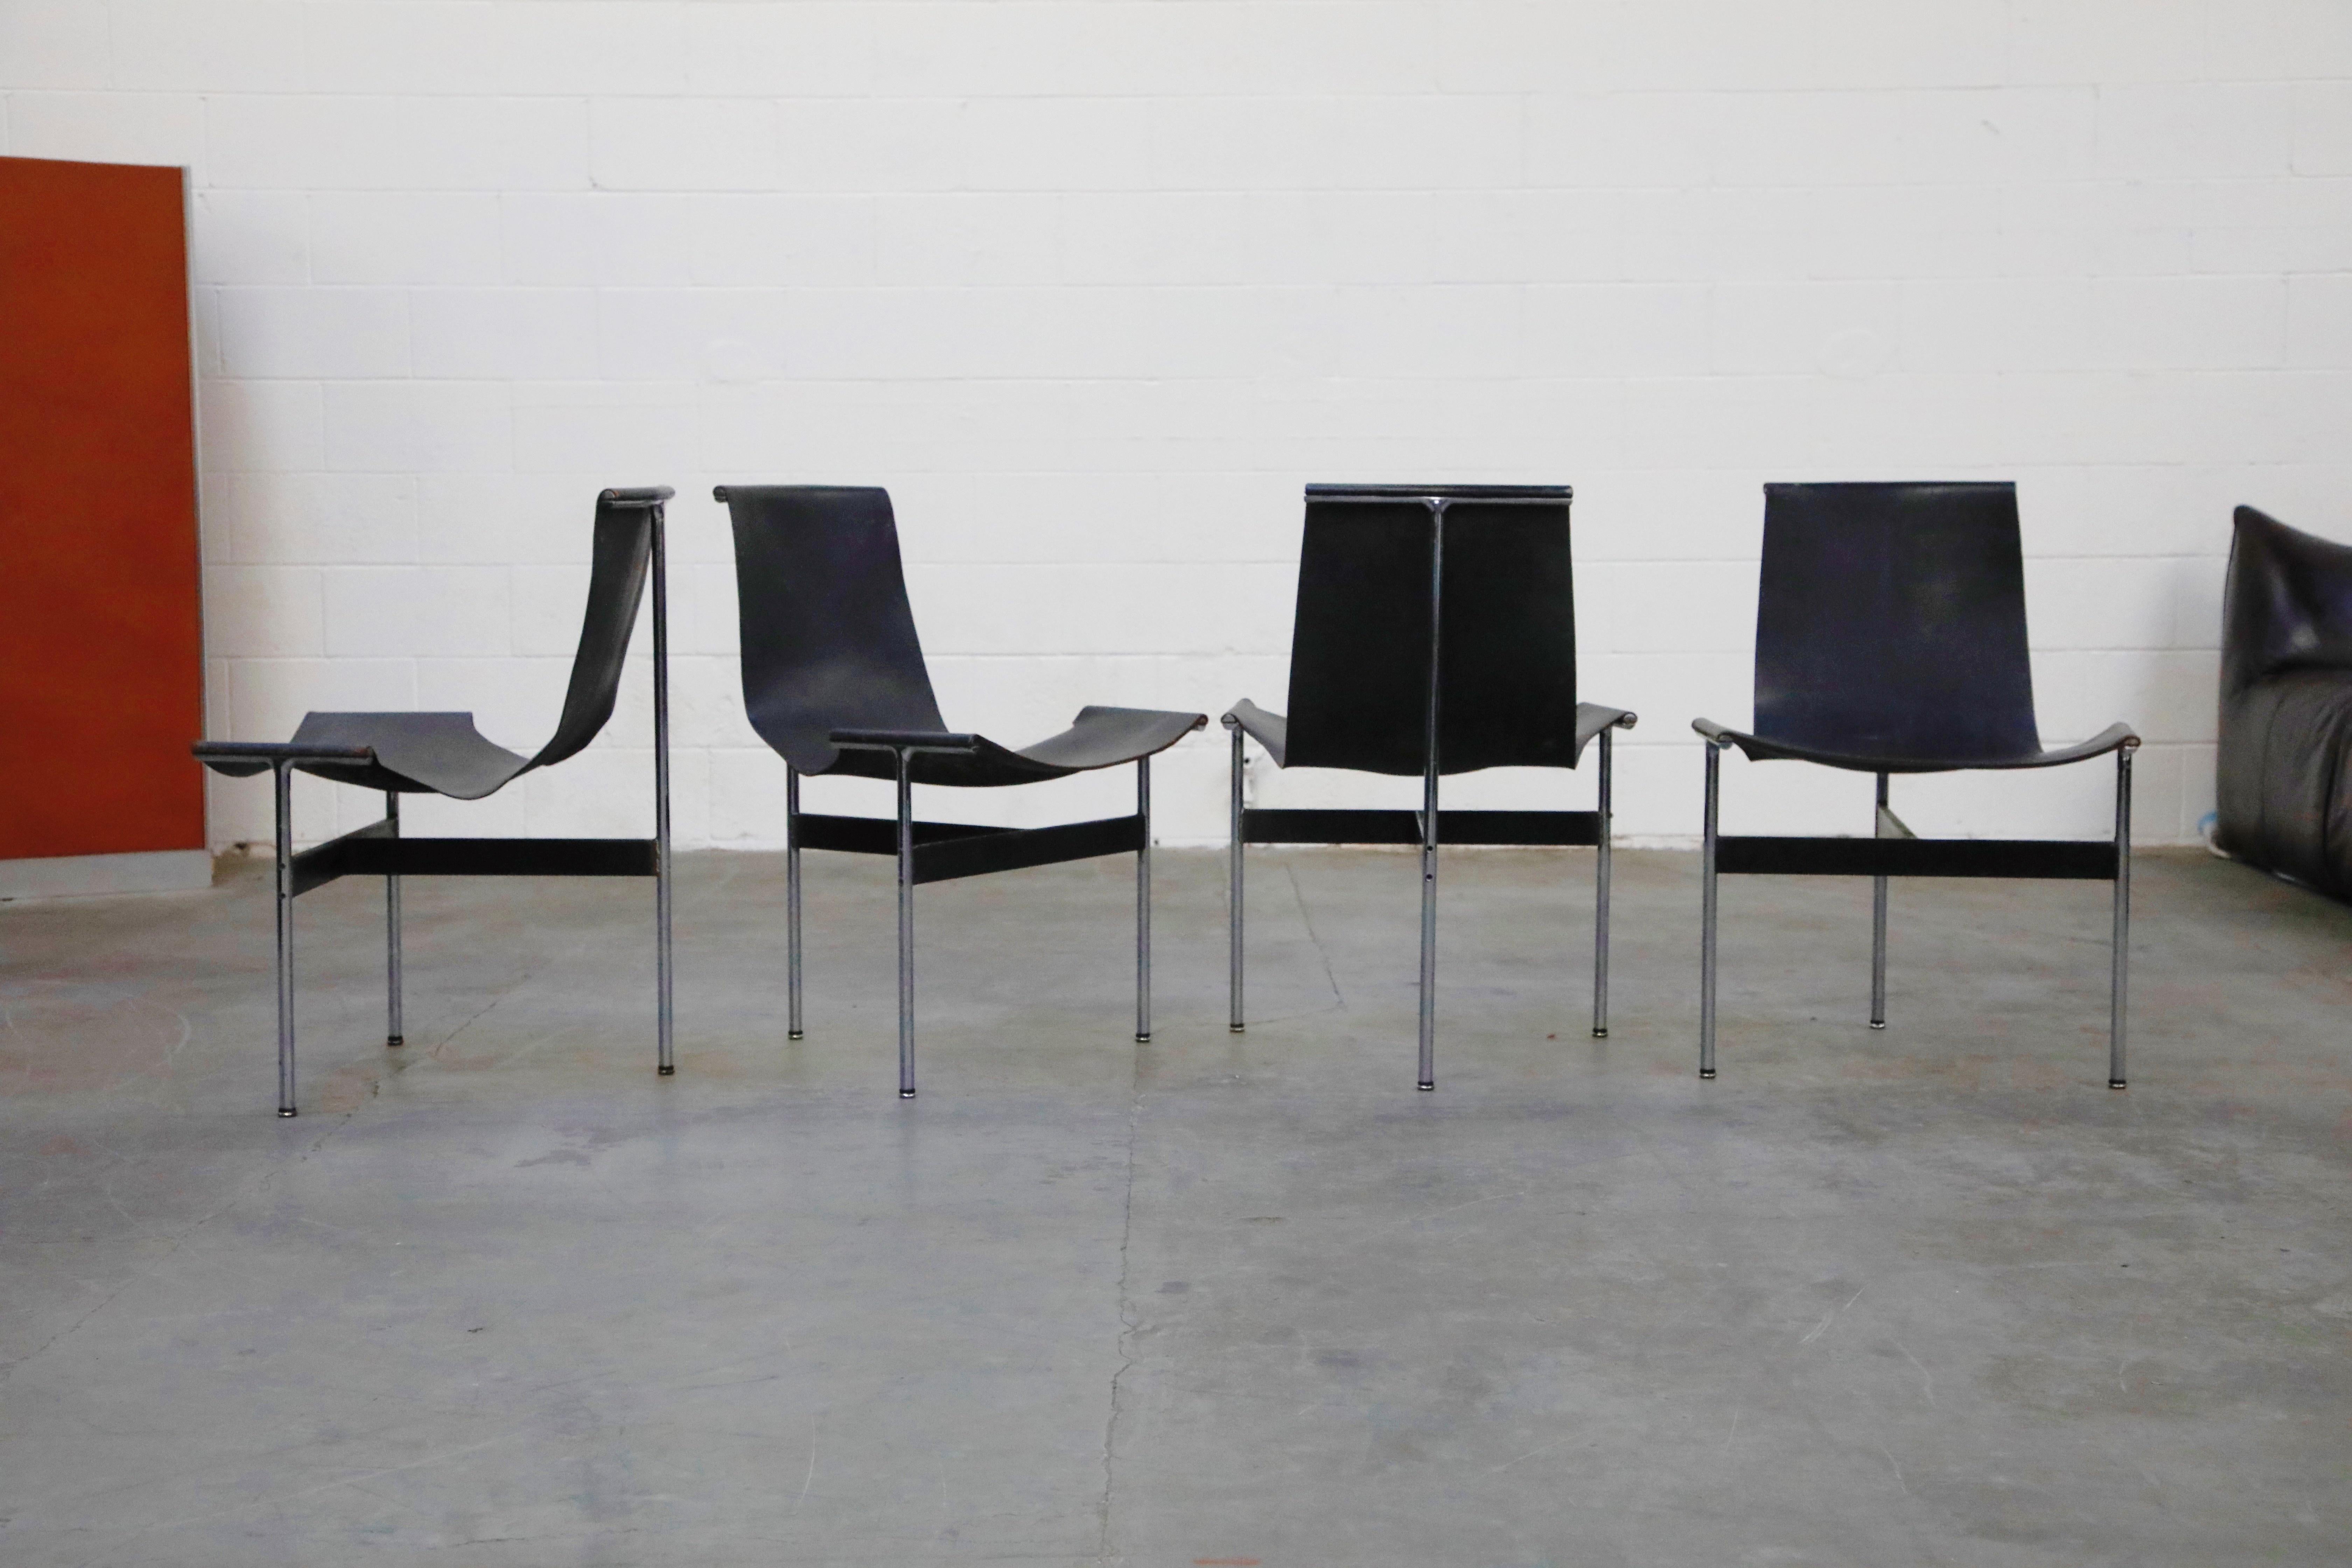 Steel Set of Four T-Chairs by Katavolos, Littell and Kelly for Laverne International